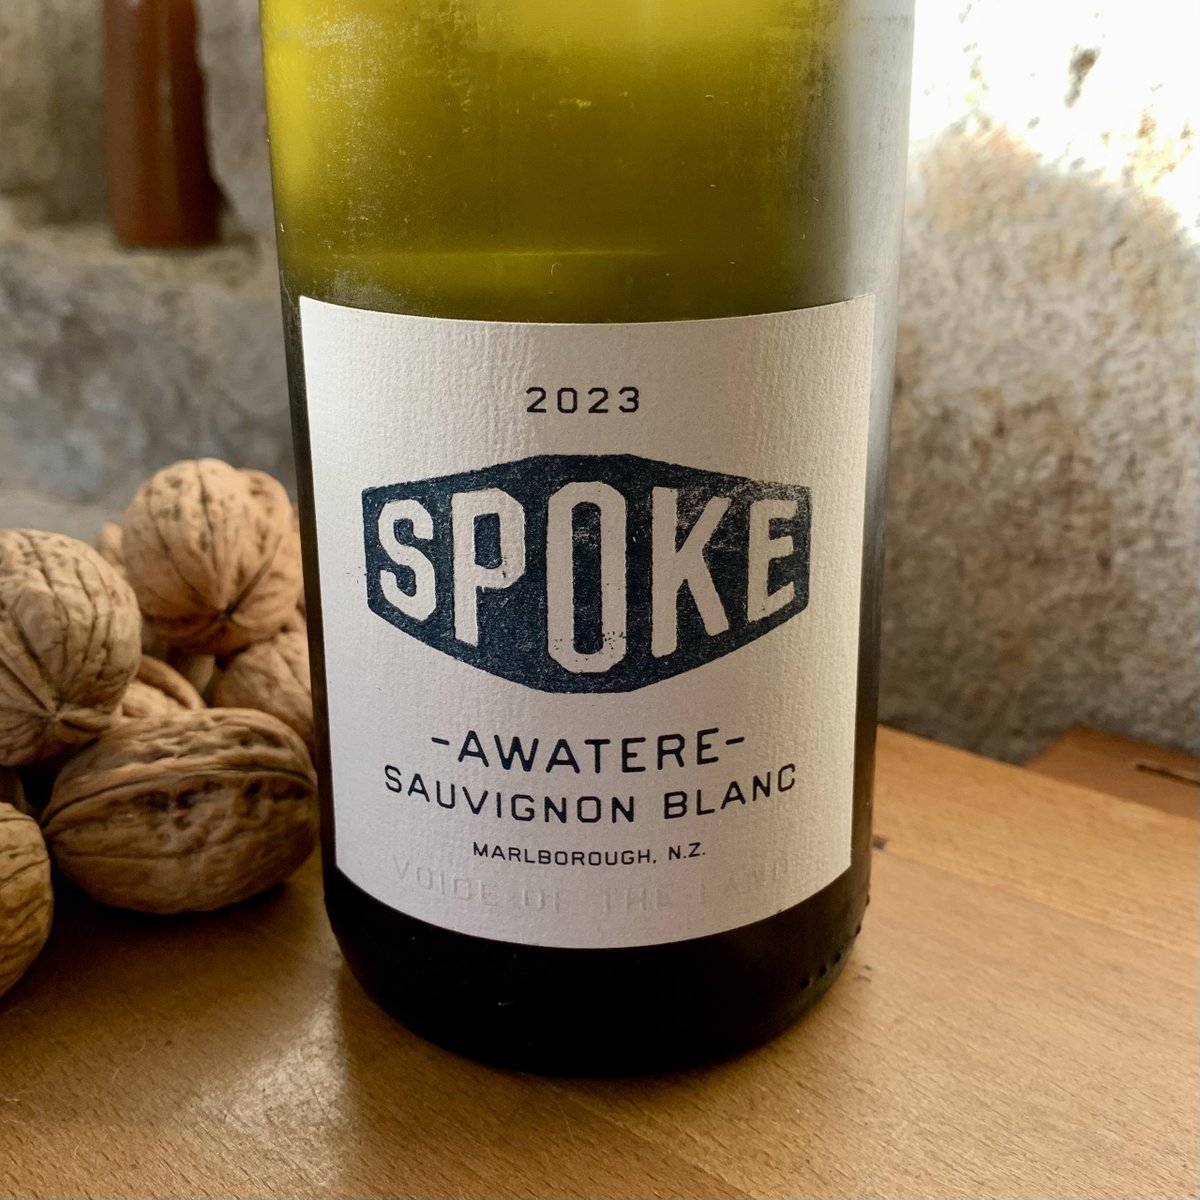 Brilliant NZ Sauvignon for International Sauvignon Blanc day tomorrow – and every other day. Single vineyard, sustainable @vineyardprods collaboration between Ben Glover of Zephyr Wines and Liam Steevenson MW joannasimon.com/post/wine-of-t… #nzwine #SauvignonBlanc @nzwine